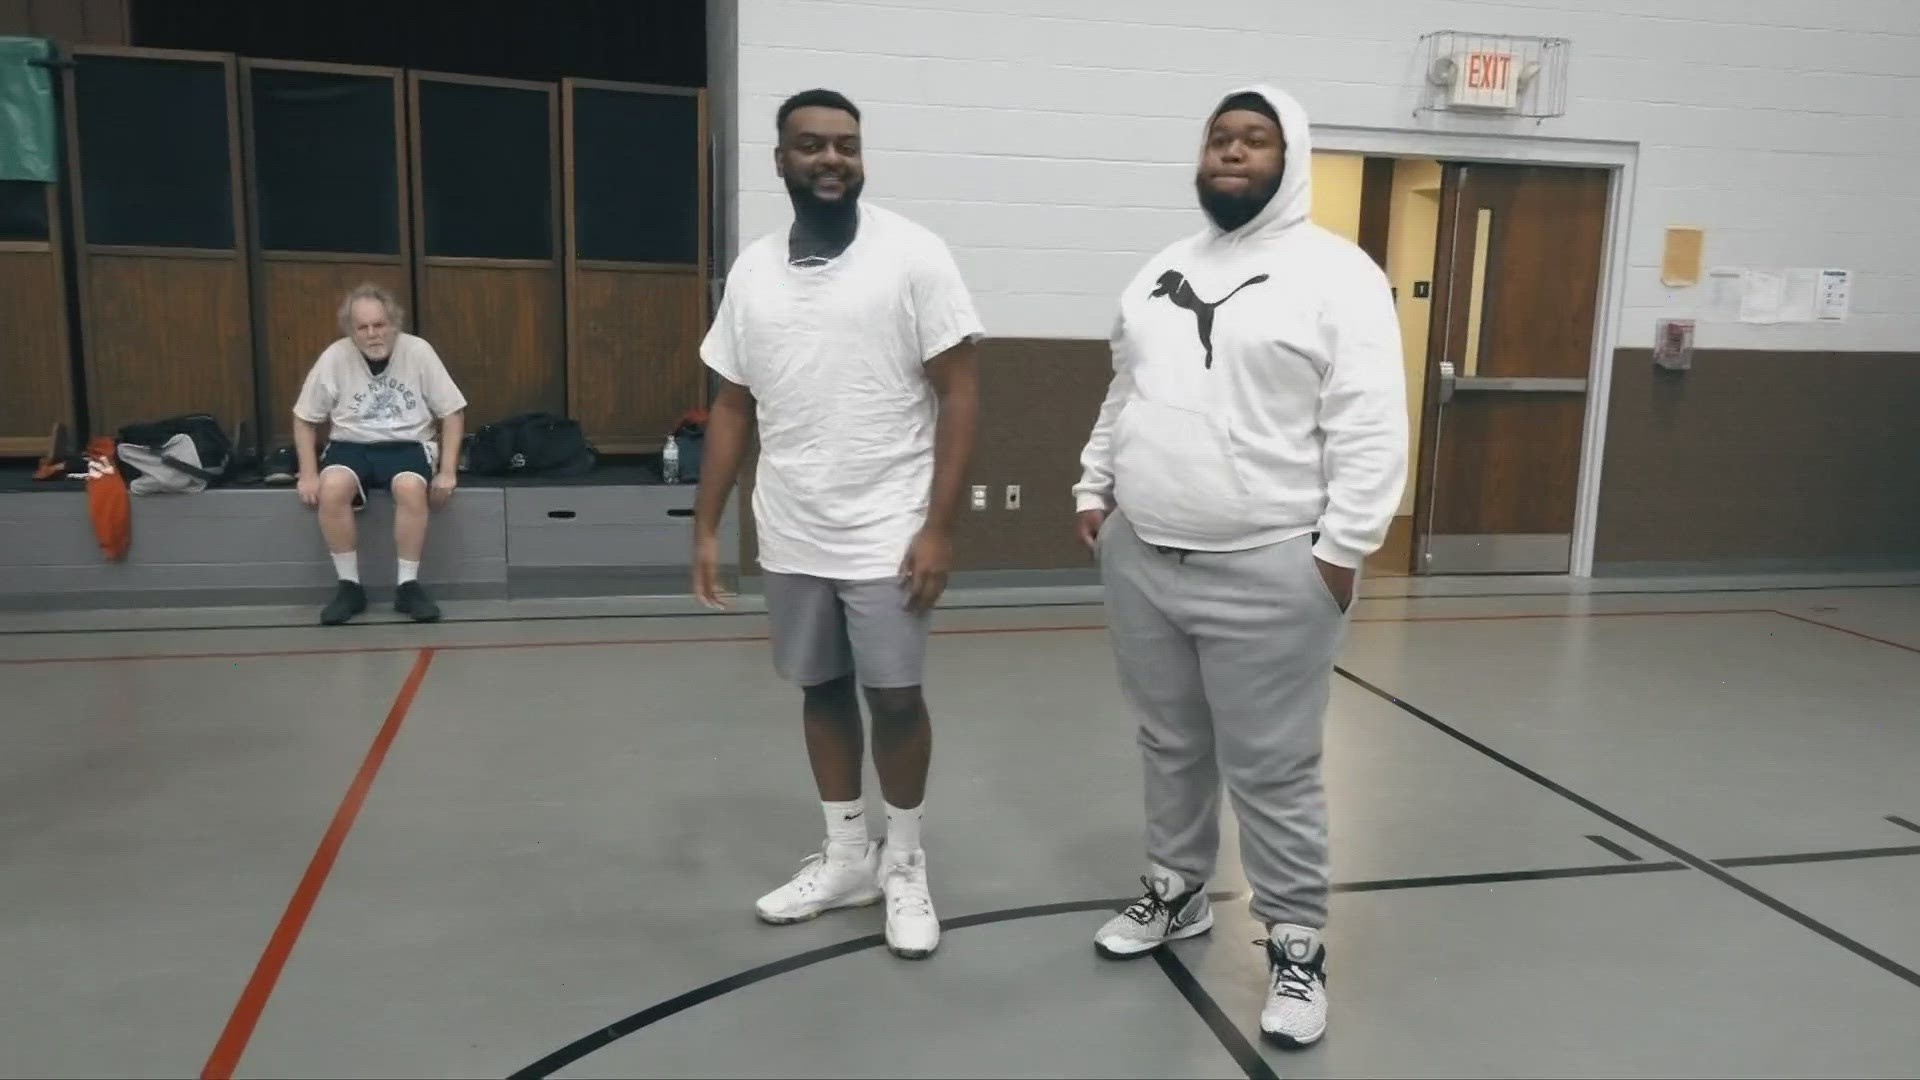 Christie Paul introduces us to a mentor/mentee pair who connected through basketball.